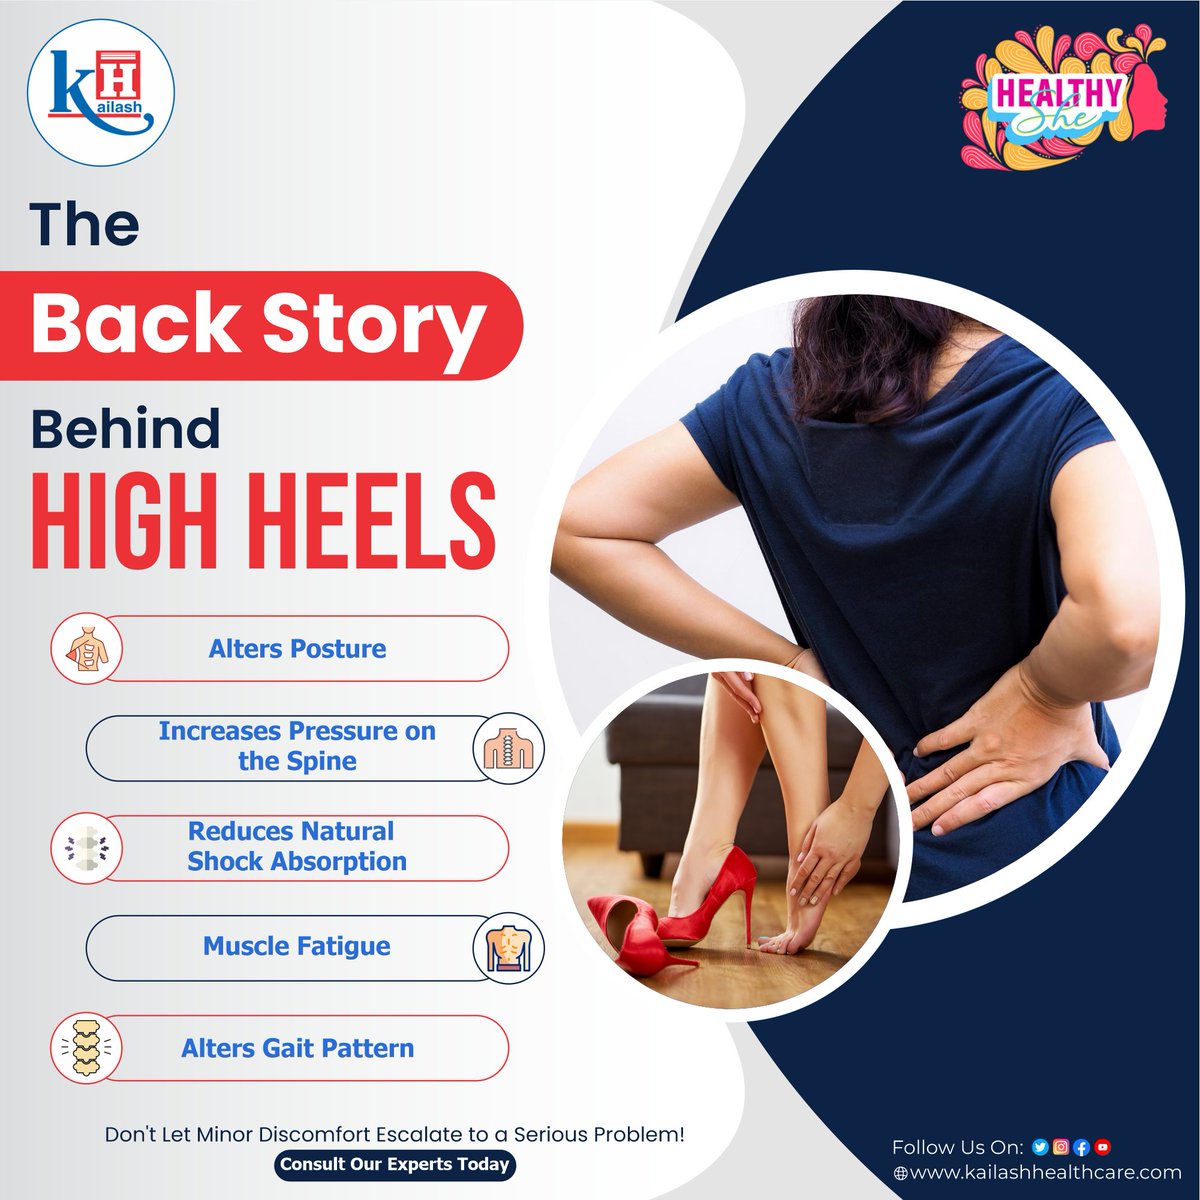 The impact of #highheels on spinal health is mostly overlooked Those stylish stilettos might look great, but they can wreak havoc on our backbones and body balance. Time to prioritize comfort and posture over fashion trends! #backpain #SpinalHealth #Backbone